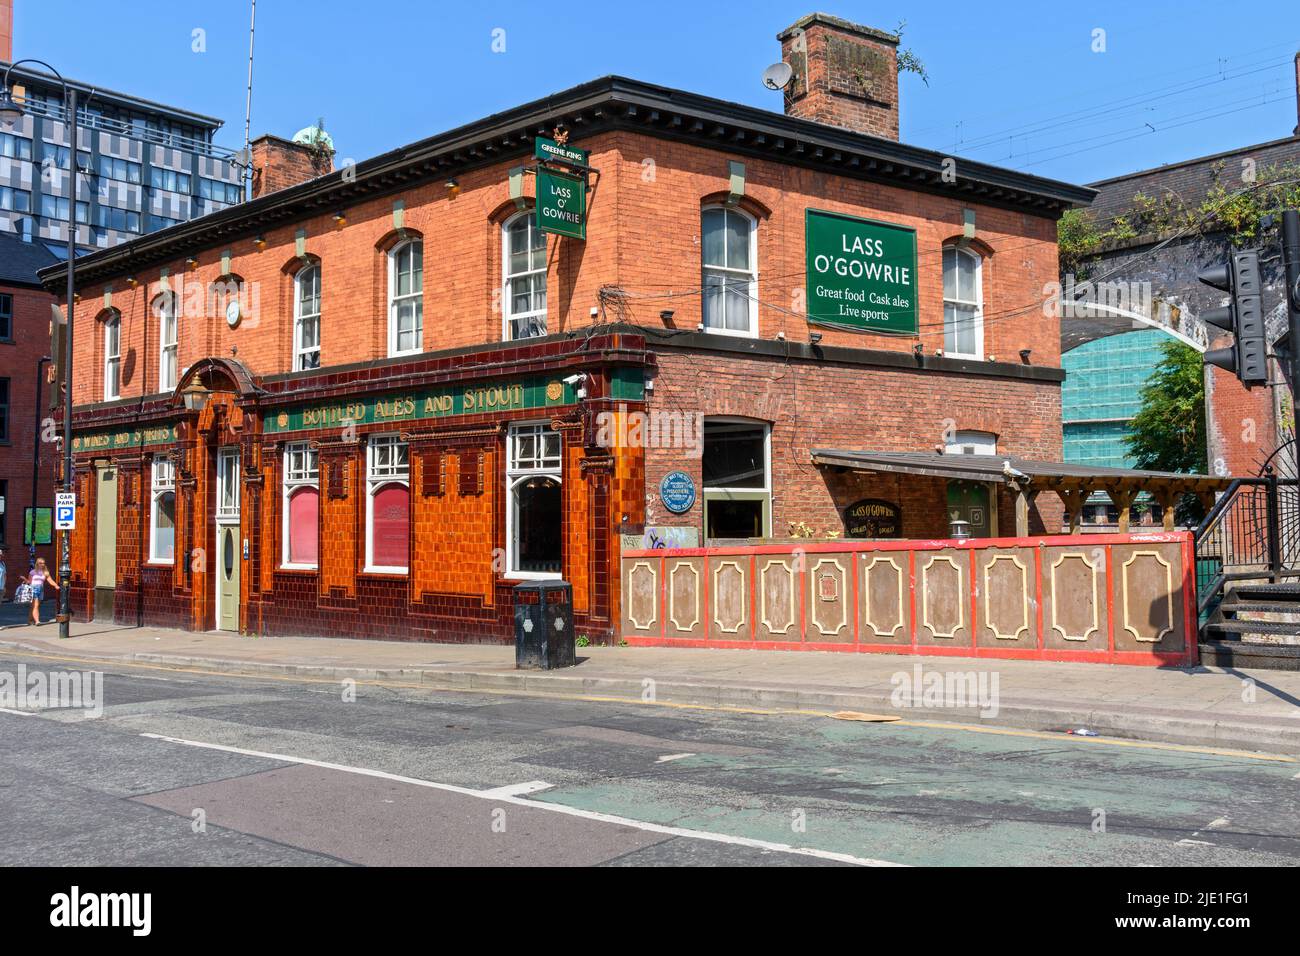 The Lass o'Gowrie public house and the bridge that carries Charles Street over the river Medlock, Manchester, England, UK. Stock Photo